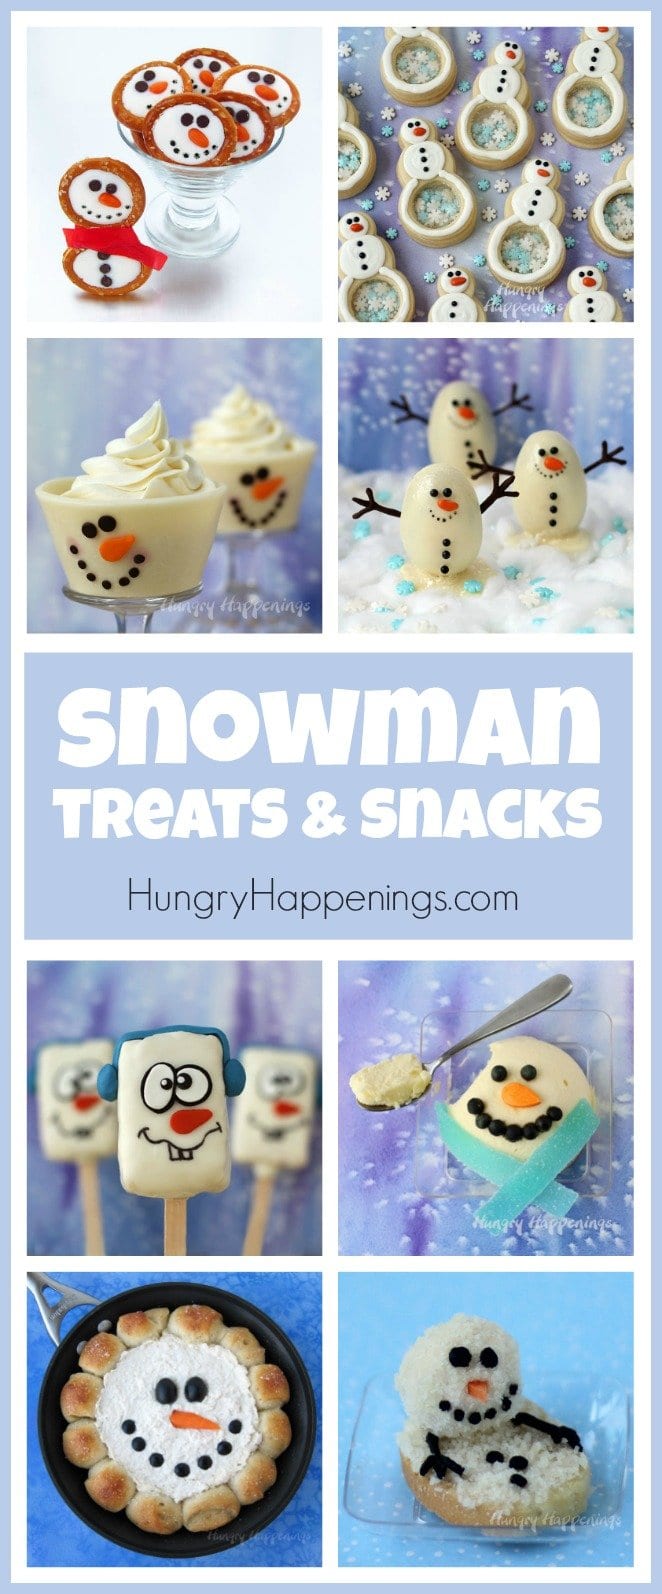 This winter have fun making some cute Snowman Treats and Snacks. Snowman cupcakes, chocolates, cheesecake, and pretzels will make wonderful Christmas treats. See all the recipes at HungryHappenings.com.